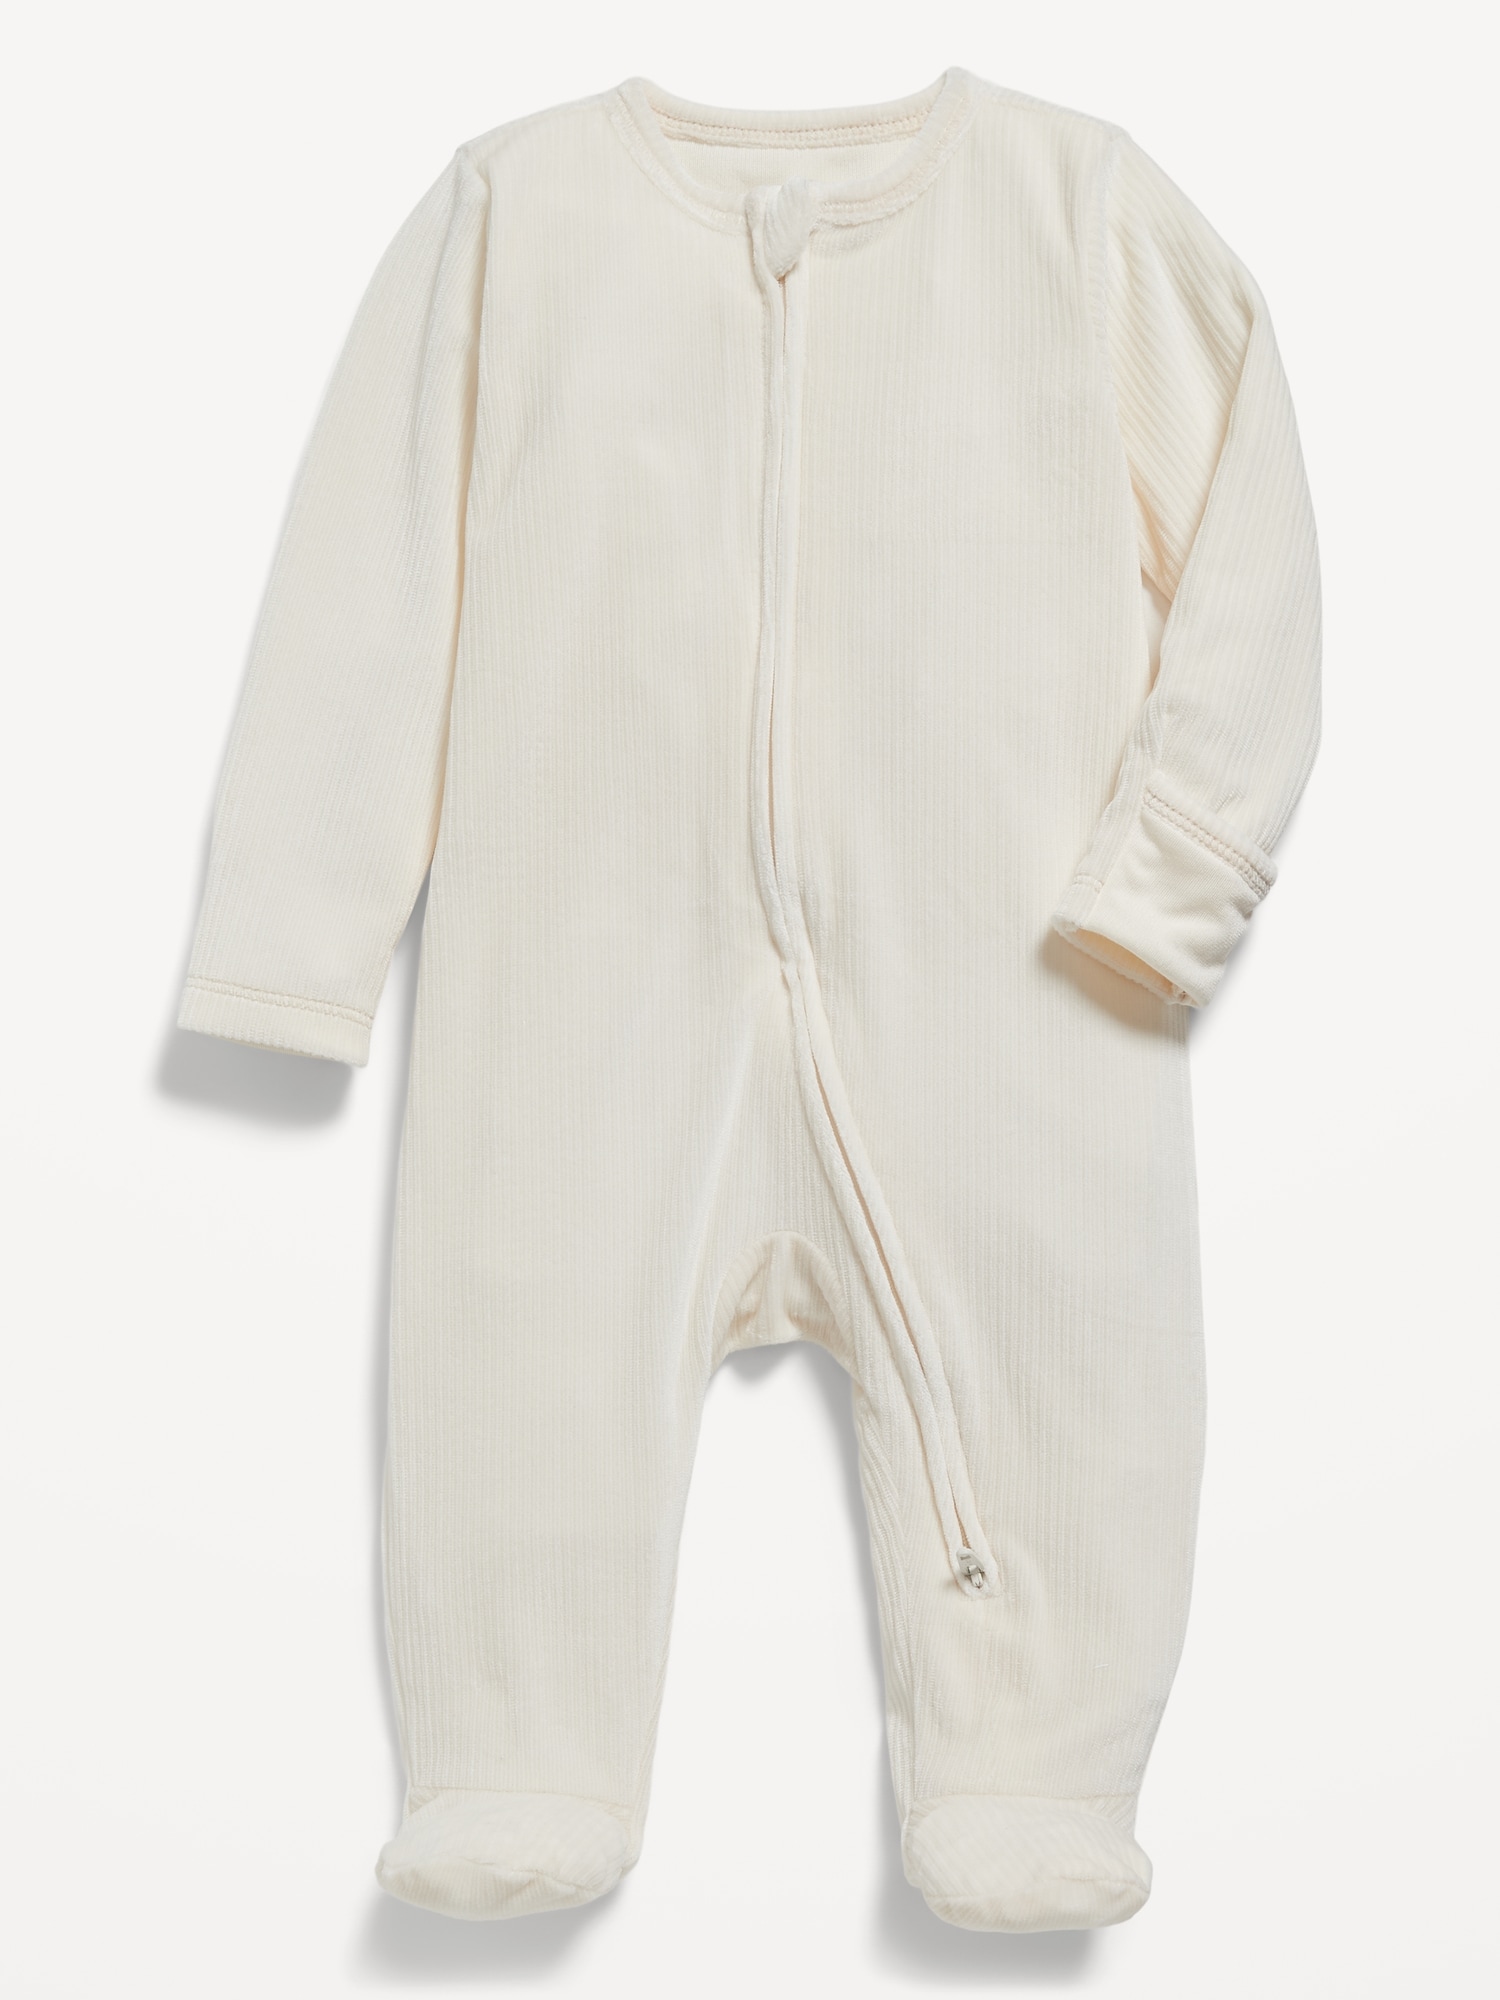 Unisex 2-Way-Zip Plush Ribbed Velour Sleep & Play Footed One-Piece for Baby